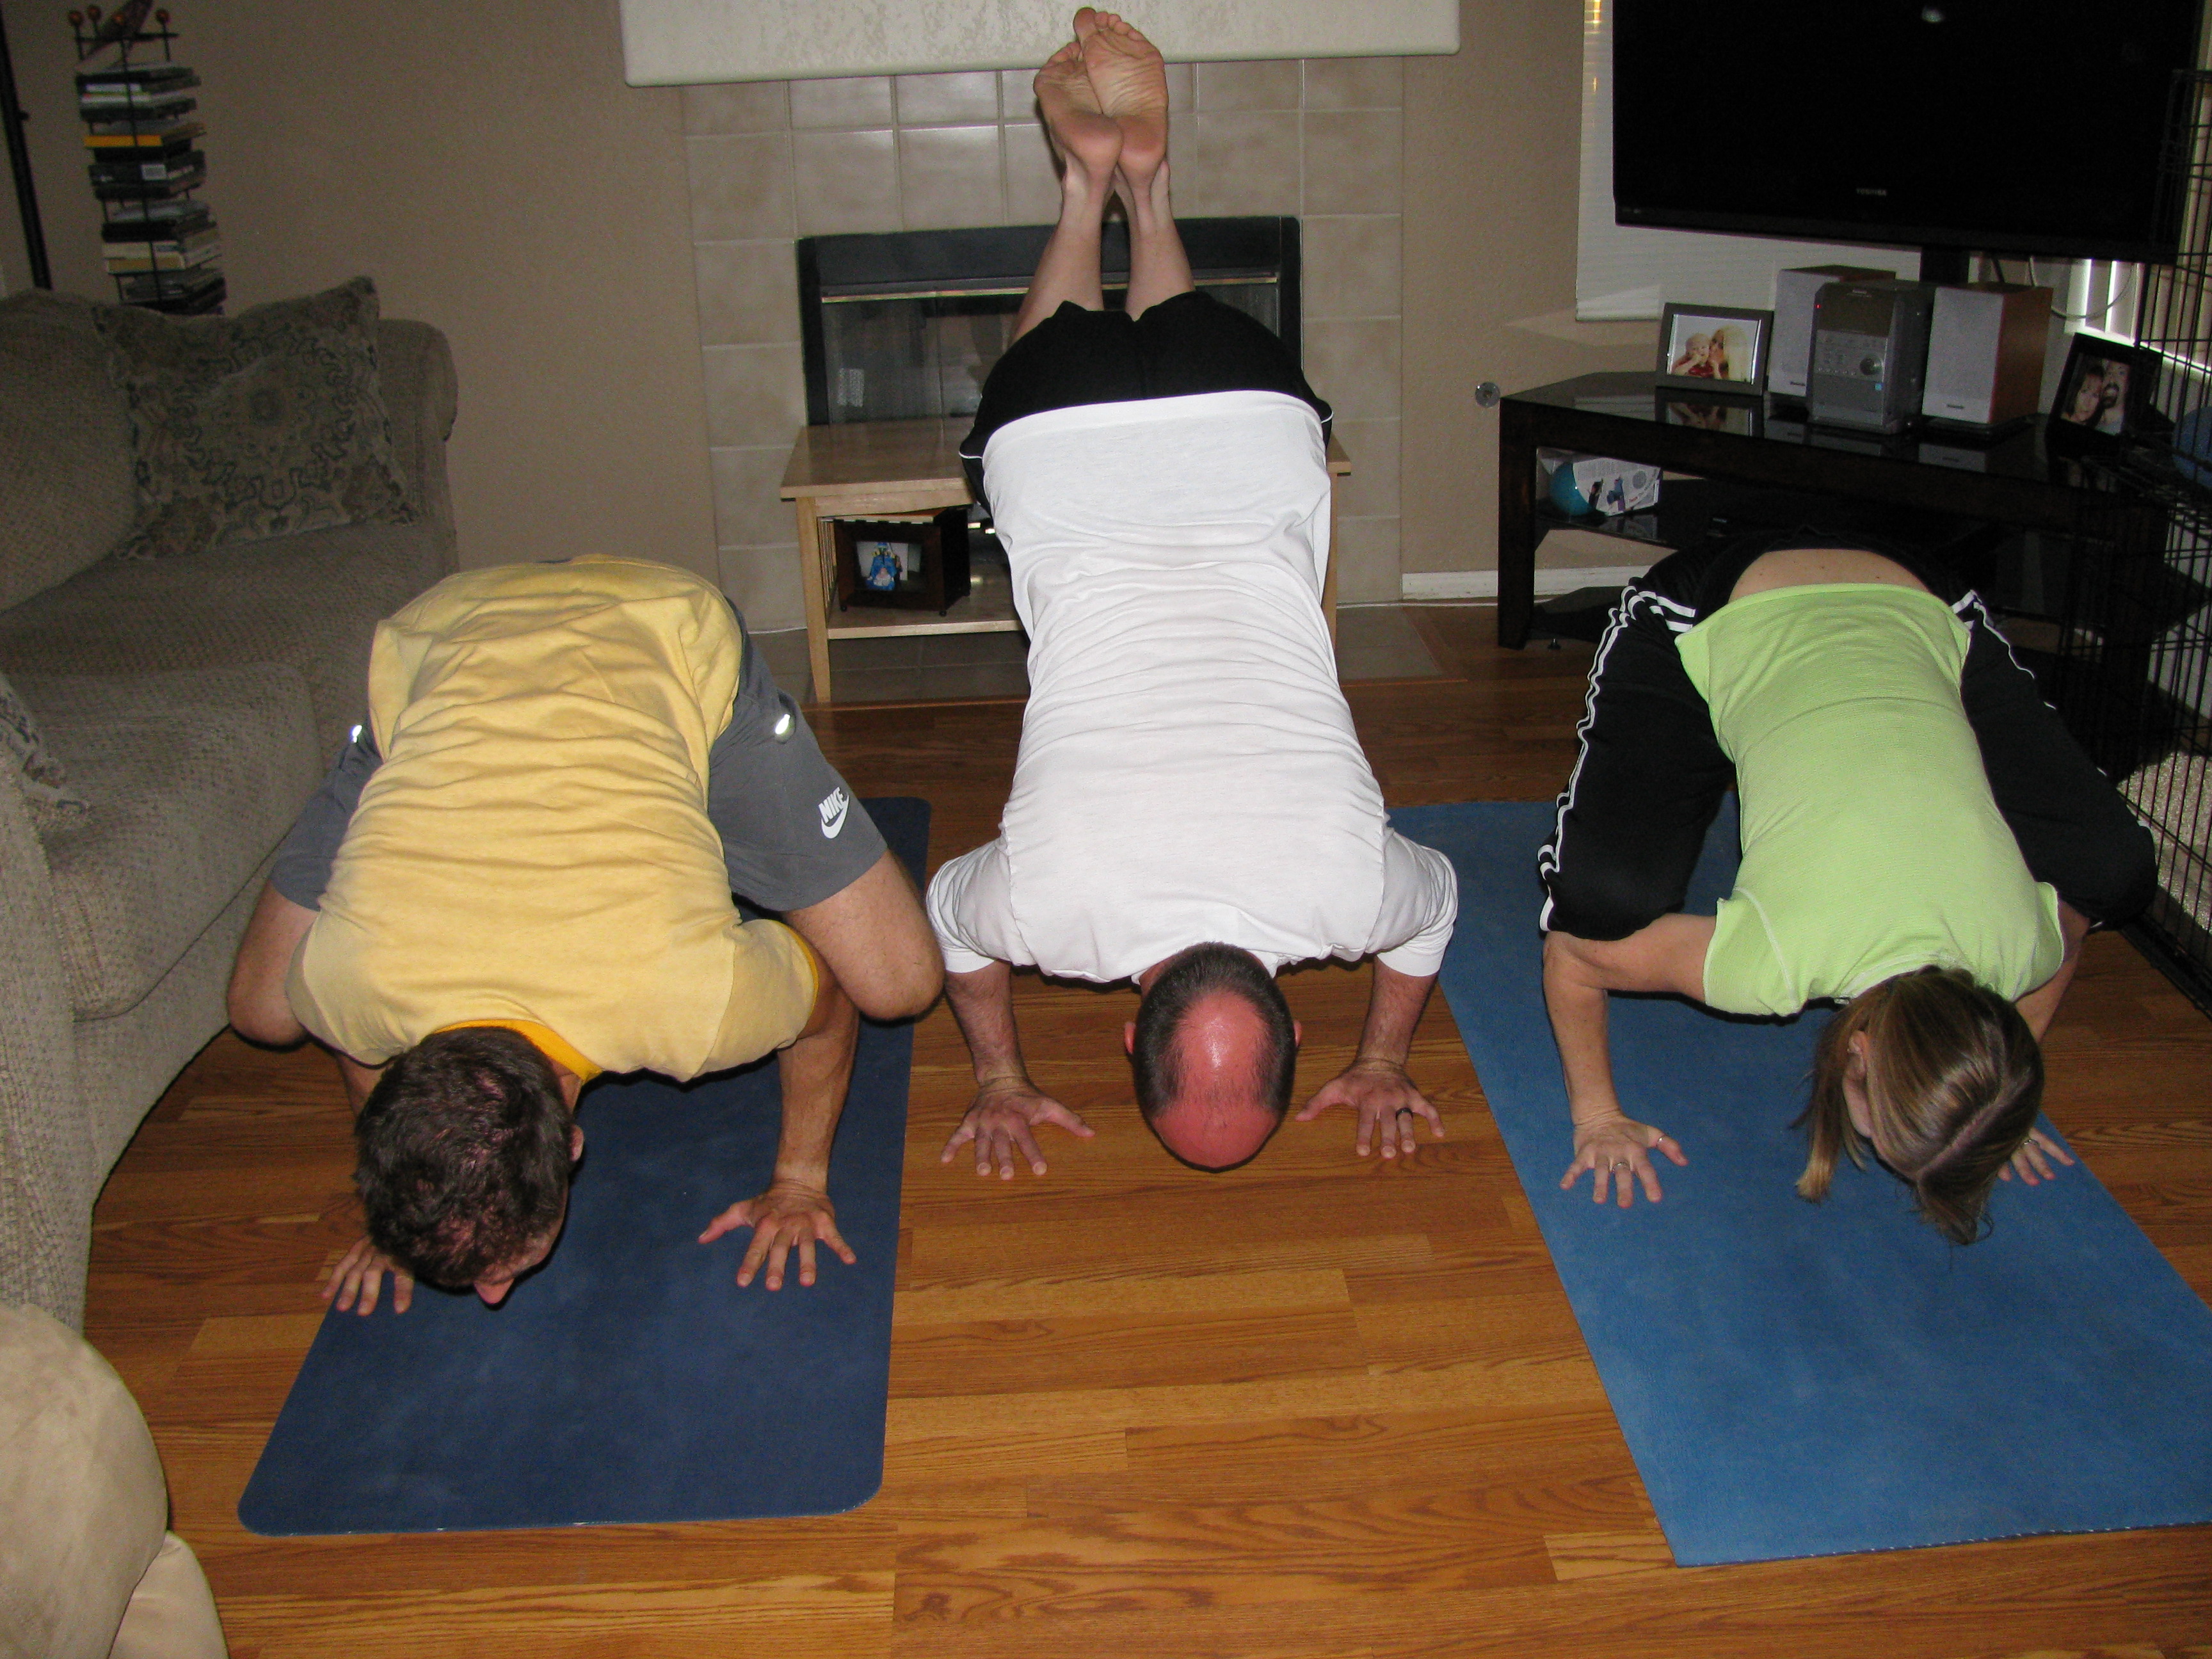 This is "Crow Pose". You can't really tell, but our heads and feet are off the ground. We're just balancing on our hands. For some reason, I can do this pose with relative ease. Needless to say, all present (including me) were impressed.